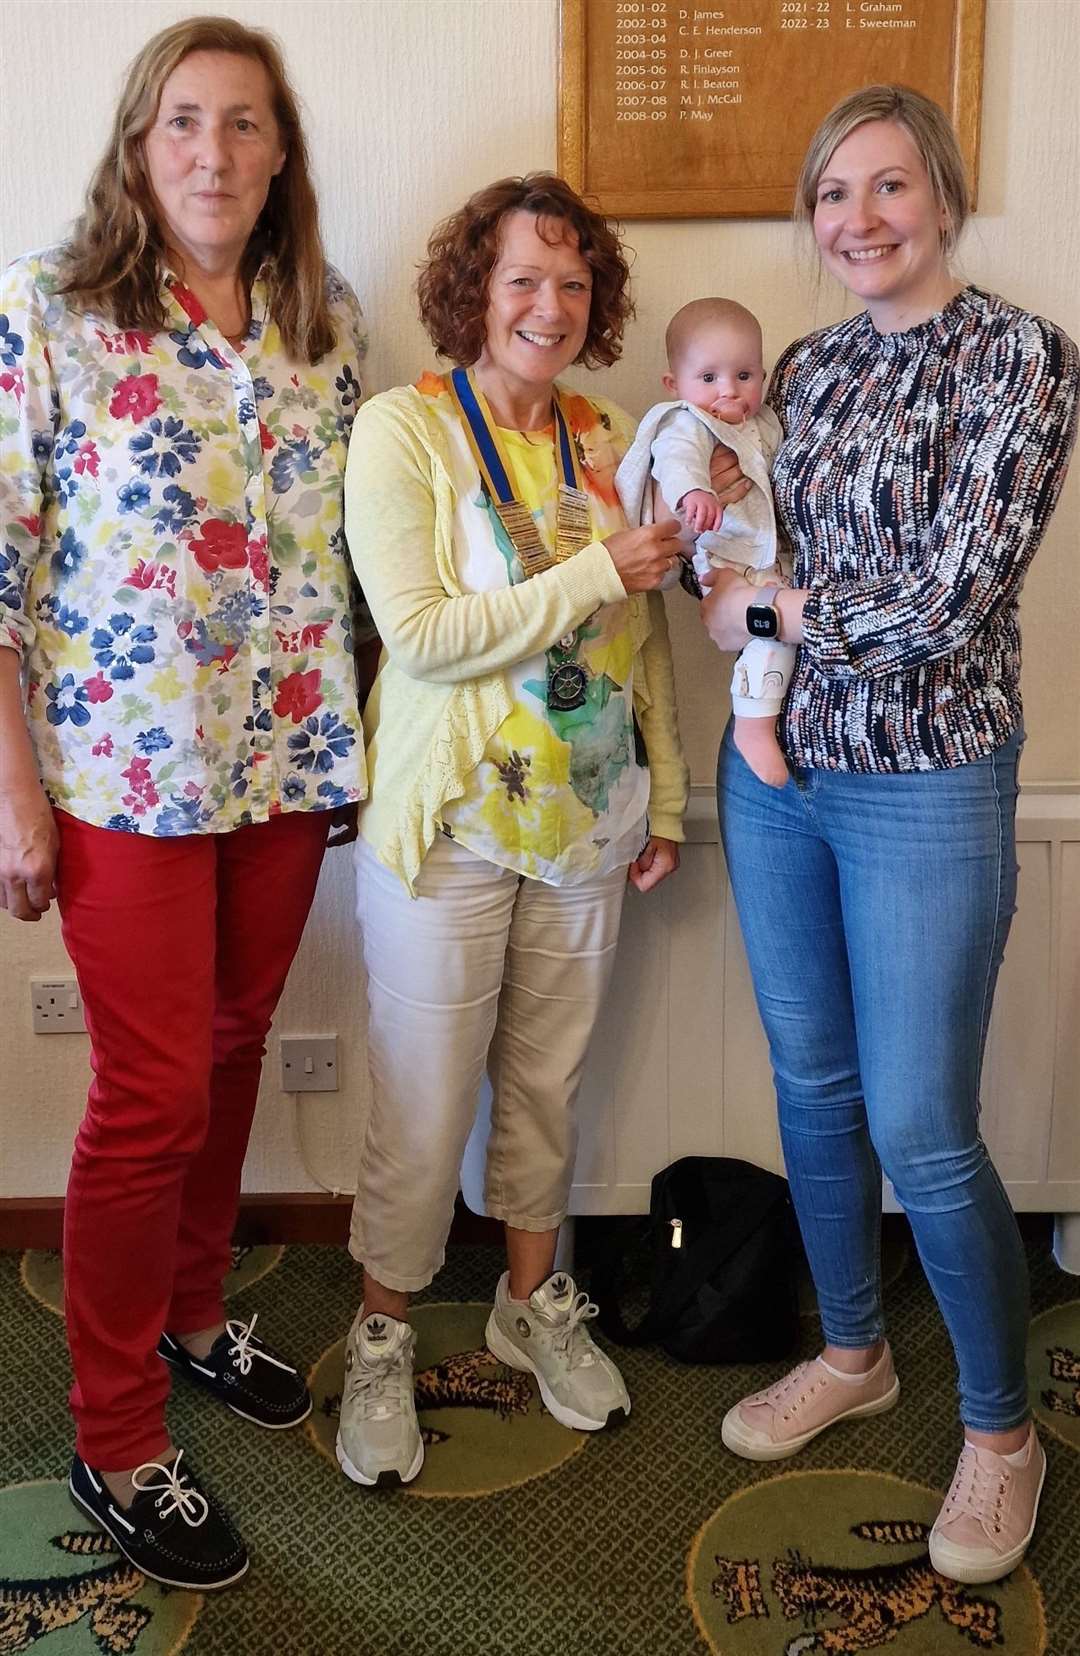 Michelle Johnstone (centre) with Elizabeth Sweetman (left) and club member Fiona Innes and her daughter Gracie.